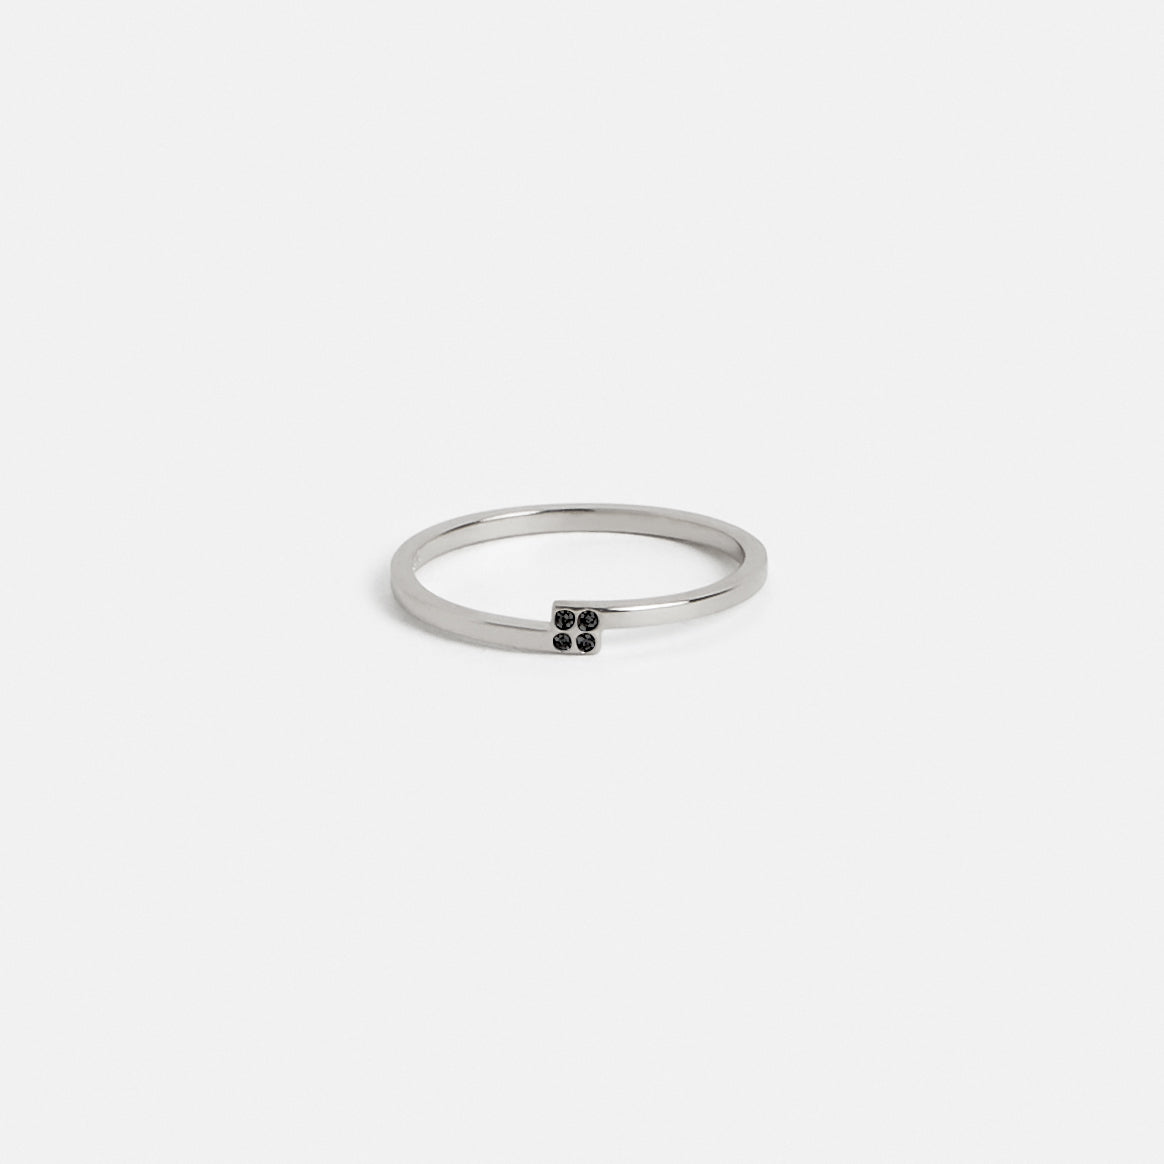 Piva Thin Ring in 14k White Gold set with Black Diamonds By SHW Fine Jewelry NYC